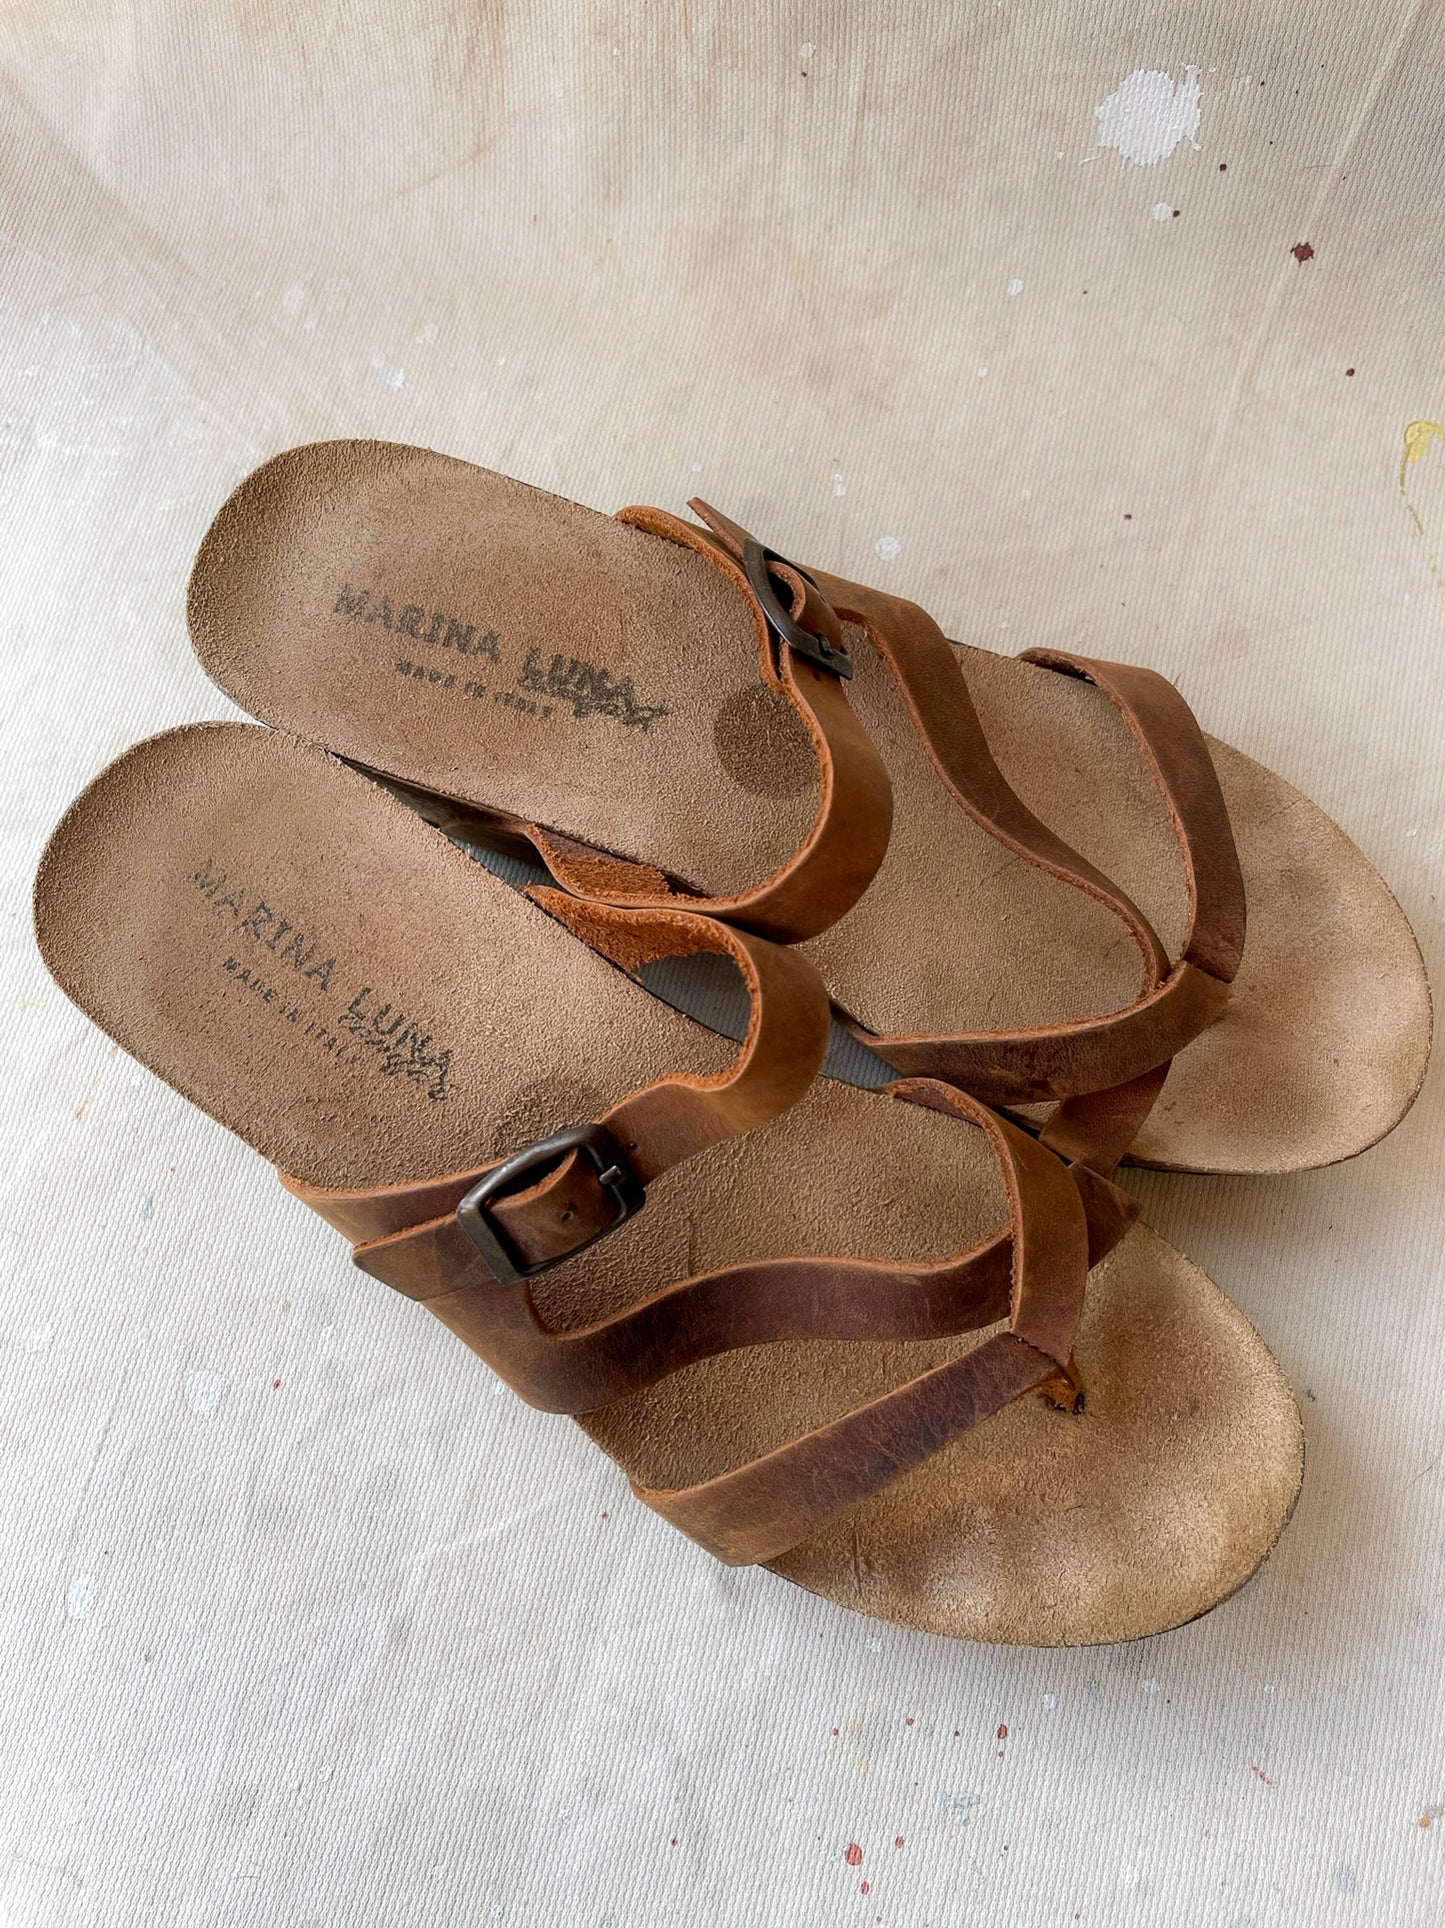 Leather Wedge Sandals—[8]